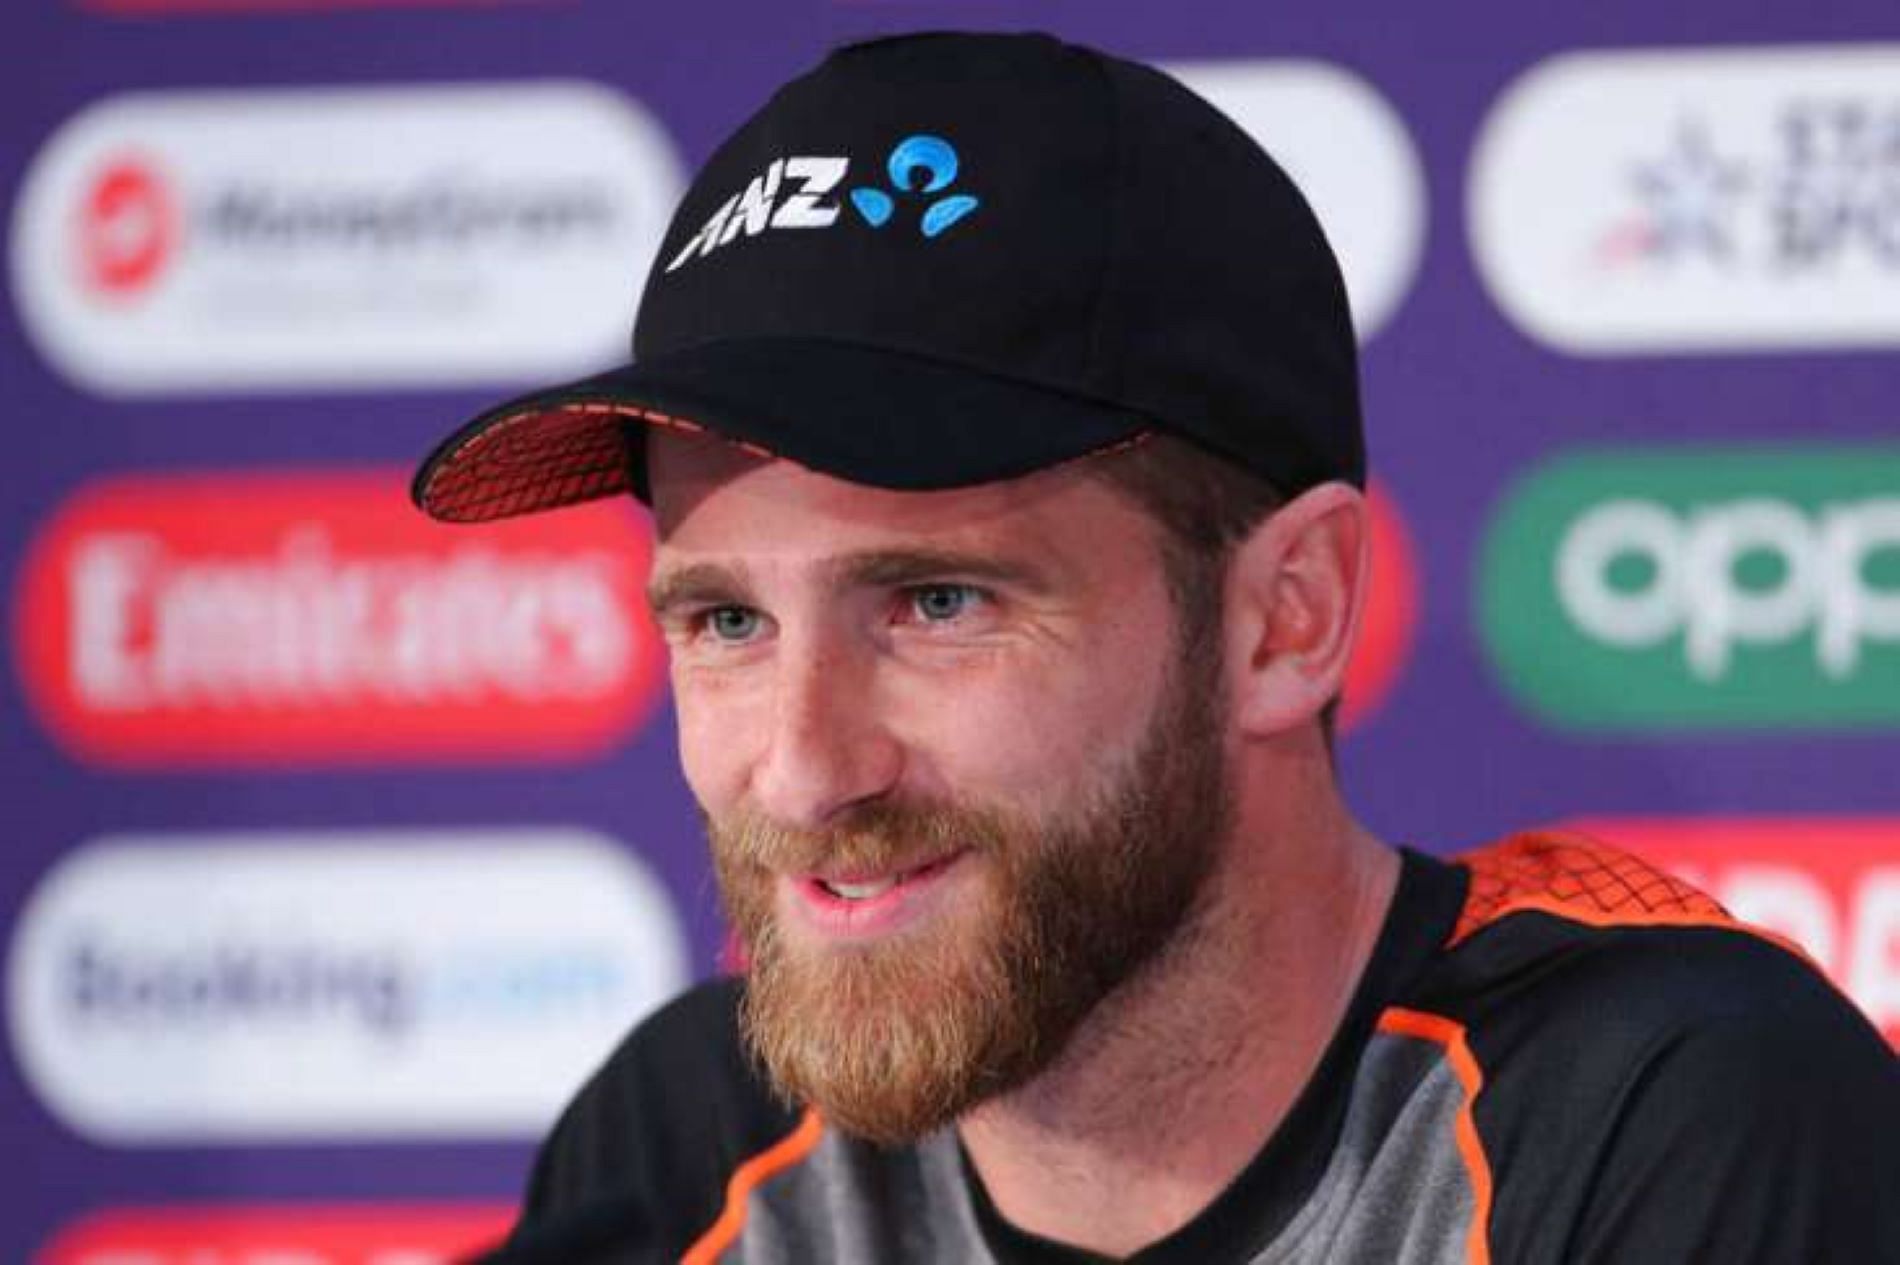 Kane Williamson will look to make his presence felt for the Gujarat Titans